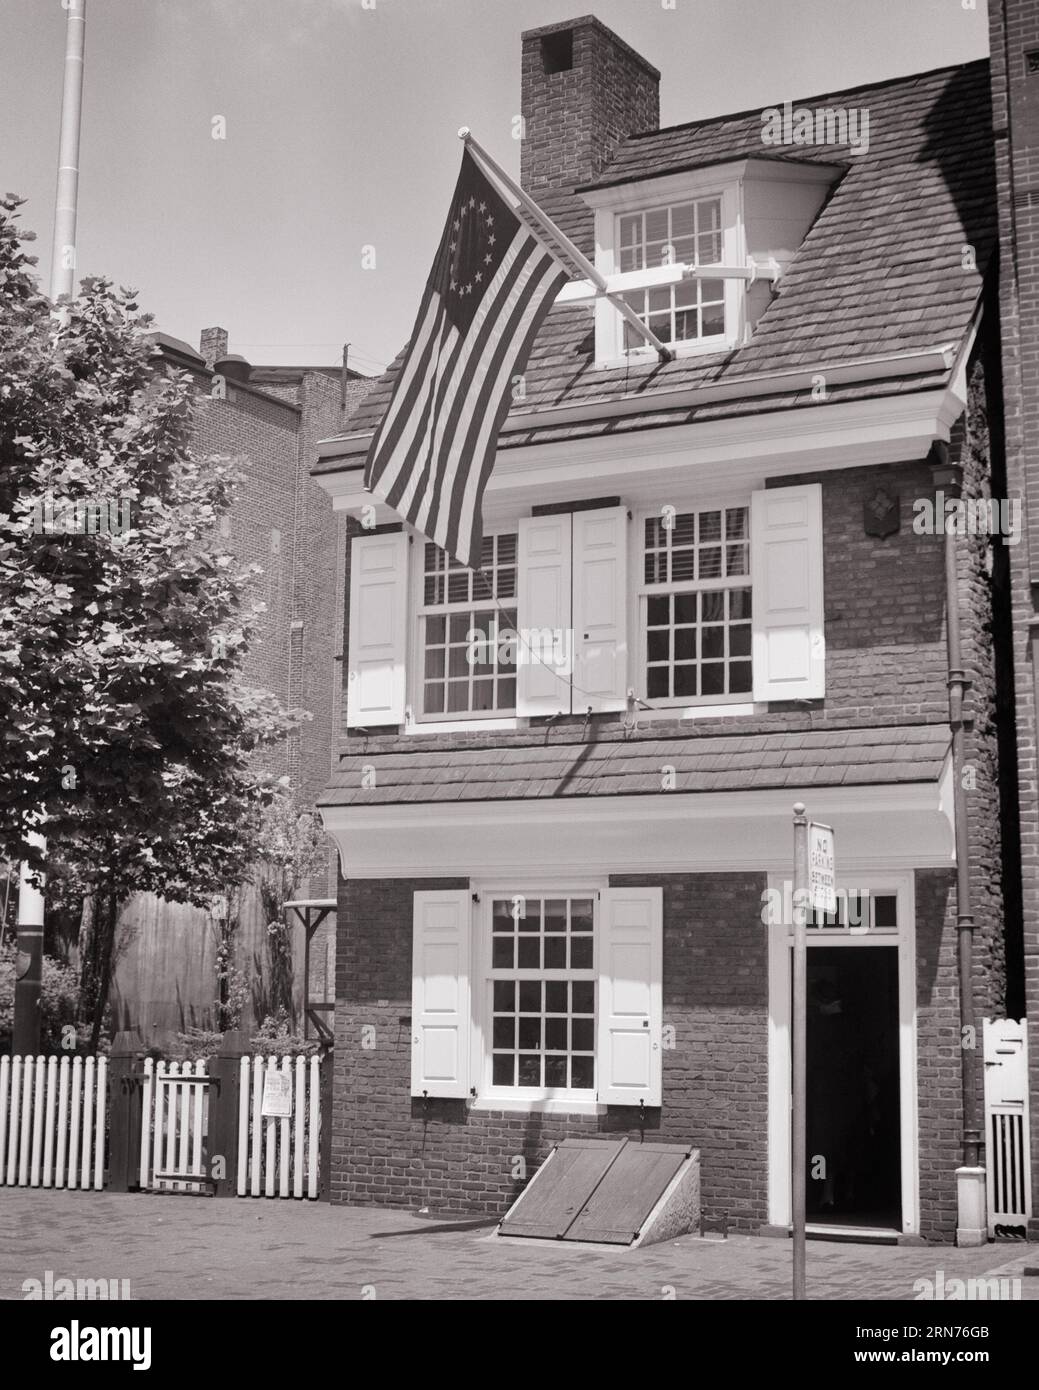 1940s THE BETSY ROSS HOUSE PHILADELPHIA PA USA - p182 HAR001 HARS REAL ESTATE STRUCTURES STARS AND STRIPES EDIFICE REVOLT AMERICAN REVOLUTIONARY WAR OLD GLORY 1770s BETSY ROSS COLONIES CREATIVITY RED WHITE AND BLUE BLACK AND WHITE CITY OF BROTHERLY LOVE HAR001 OLD FASHIONED Stock Photo